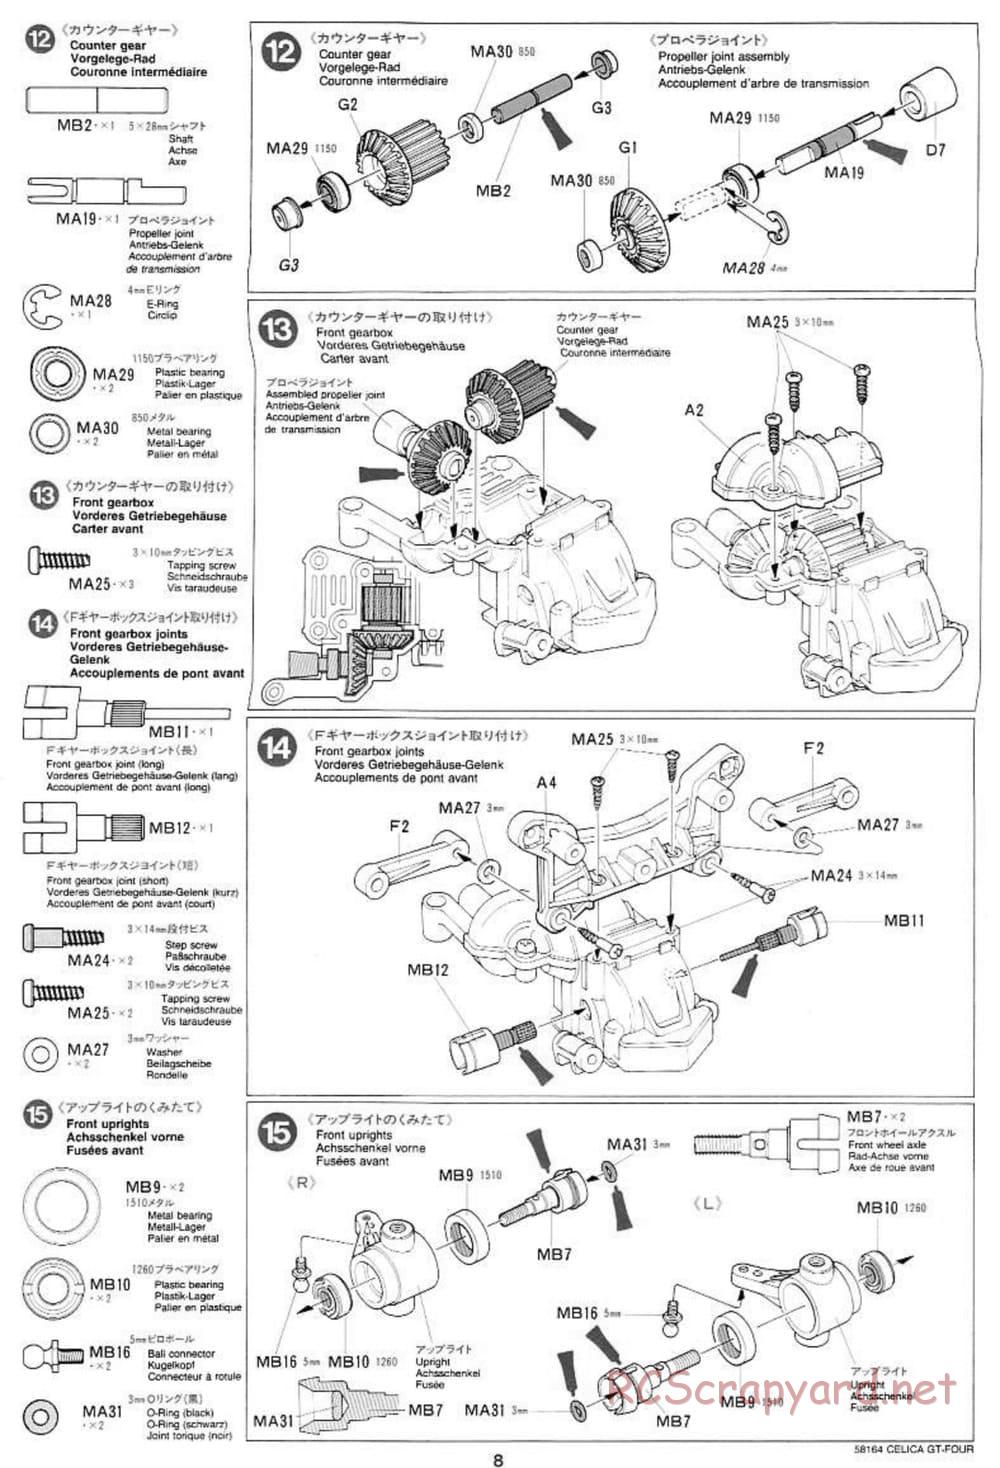 Tamiya - Toyota Celica GT Four - TA-02 Chassis - Manual - Page 8